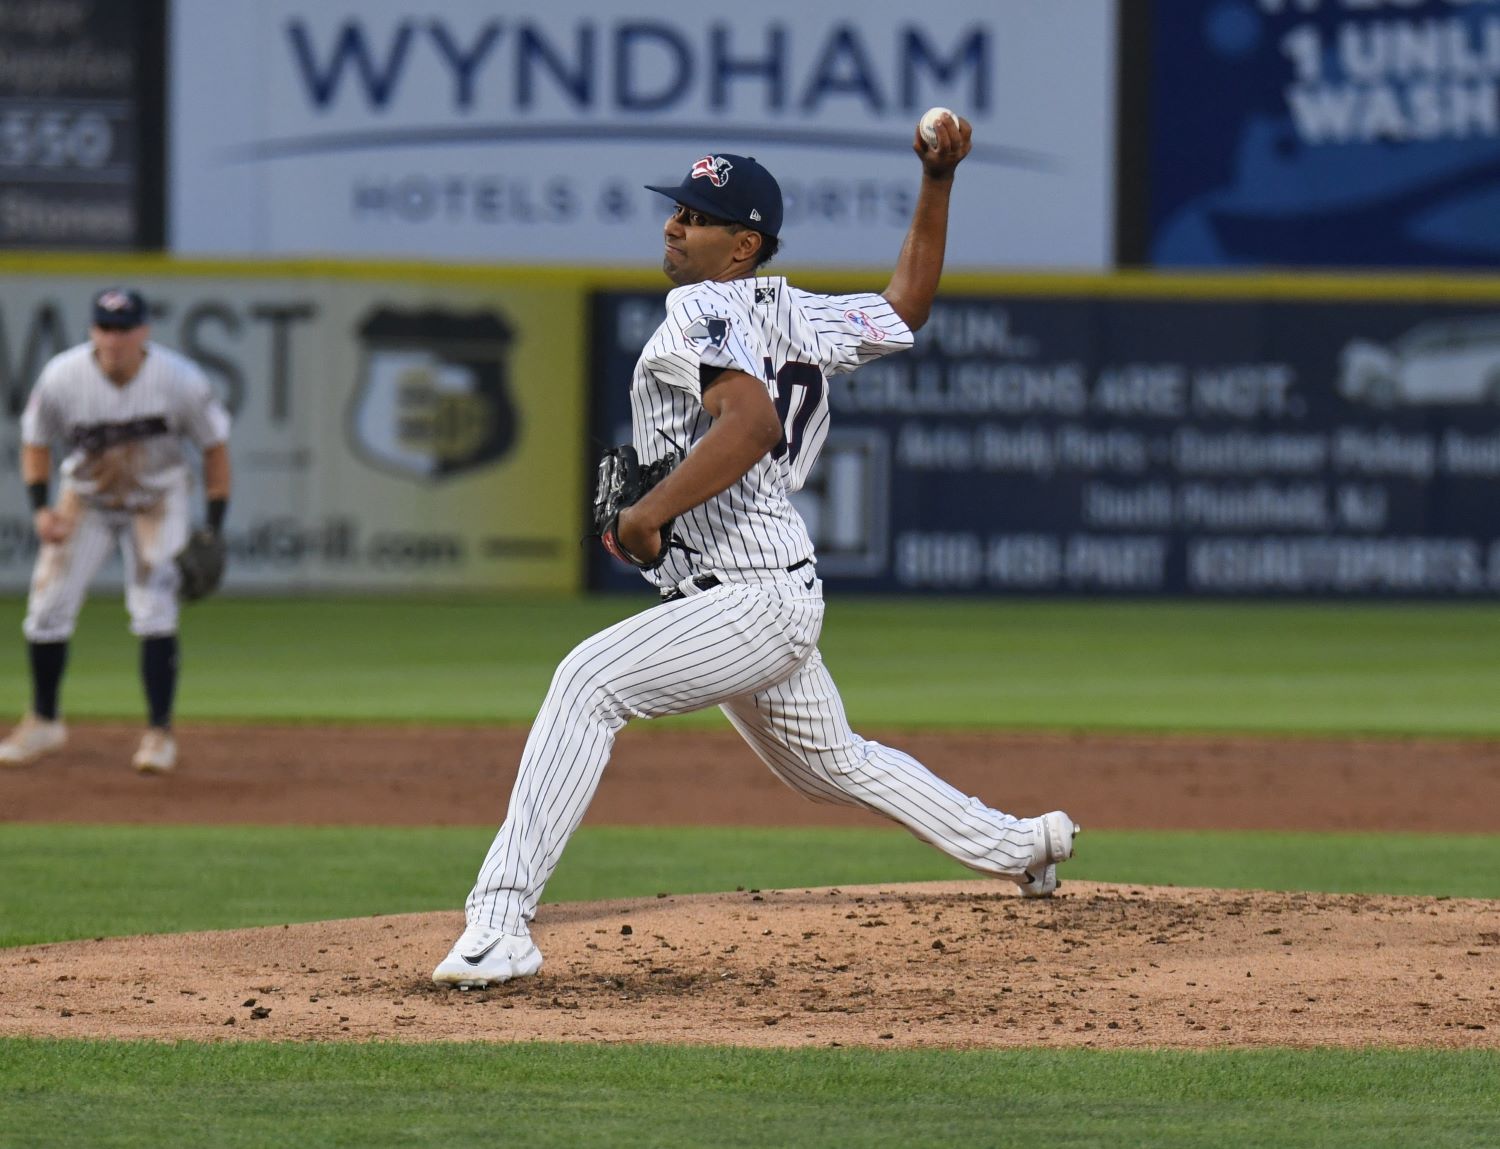 Yankees Schedule LHP Nestor Cortes for Rehab with Somerset Patriots